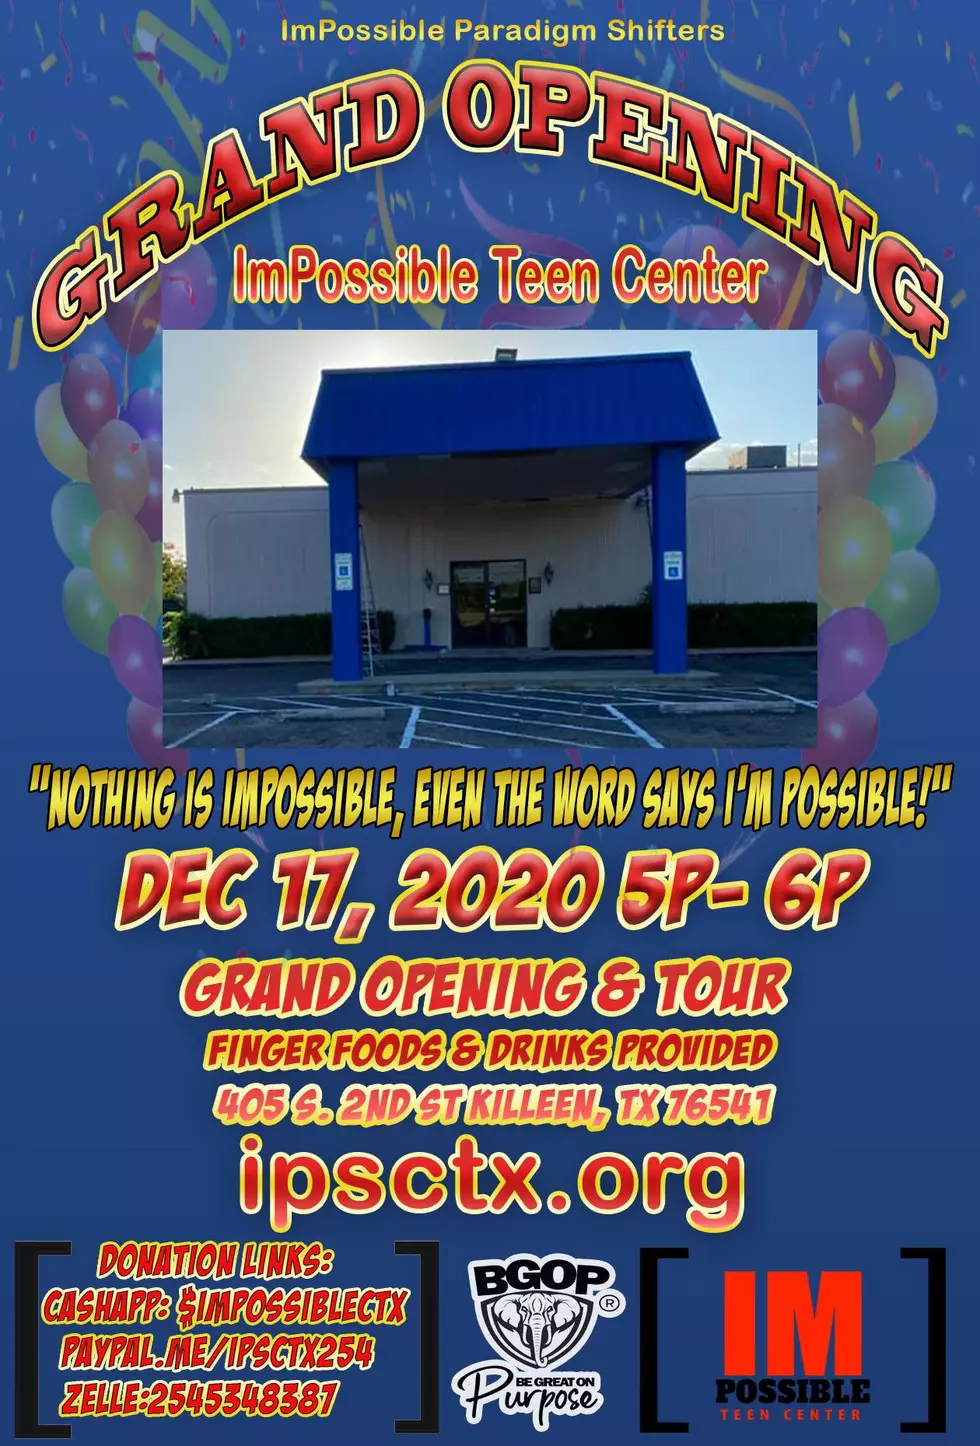 ImPossible Teen Center In Killeen Is Inviting You To The Grand Opening